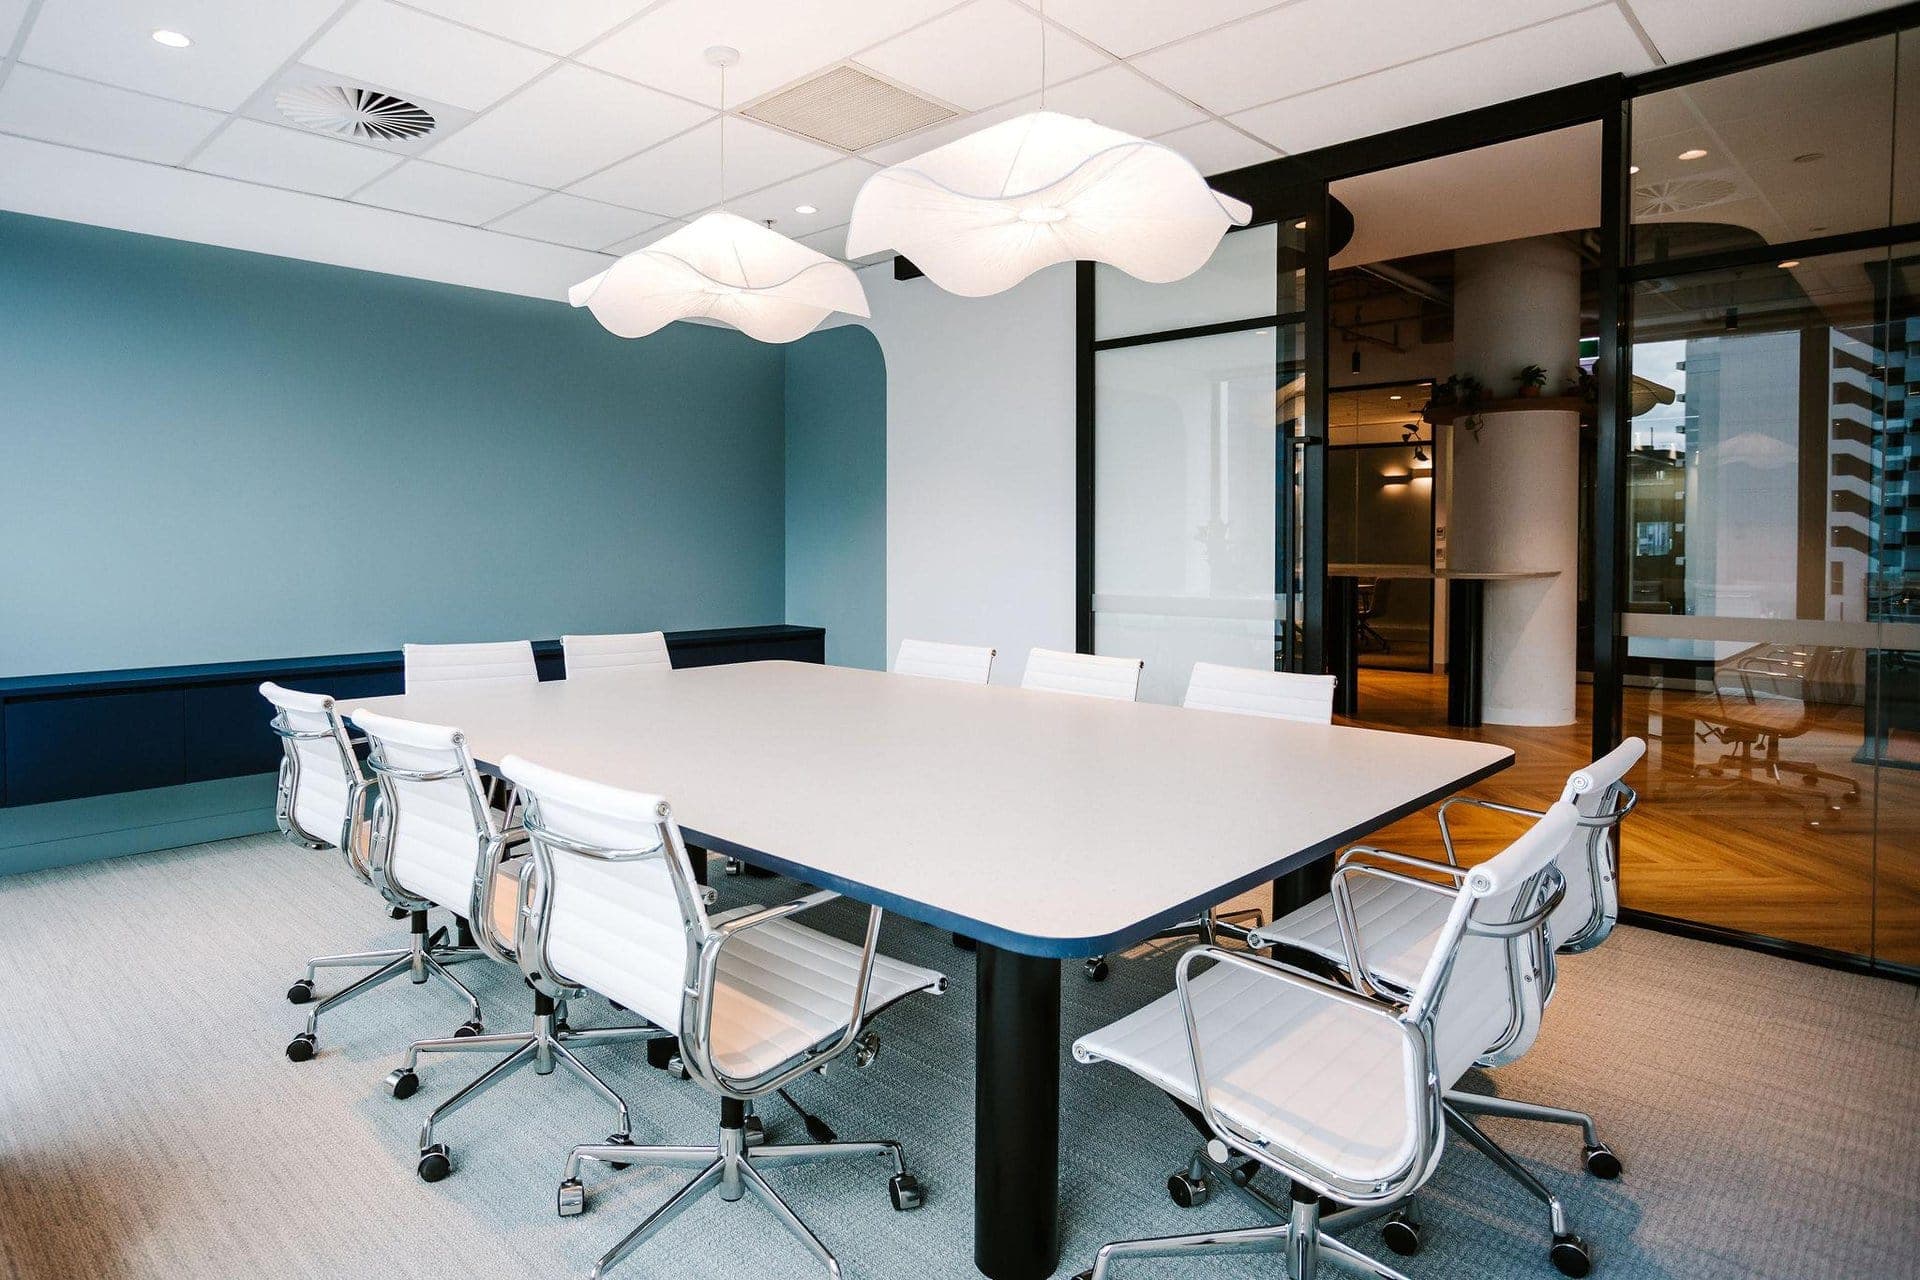 6 WALL MURAL IDEAS FOR A BETTER BOARDROOM – Eazywallz